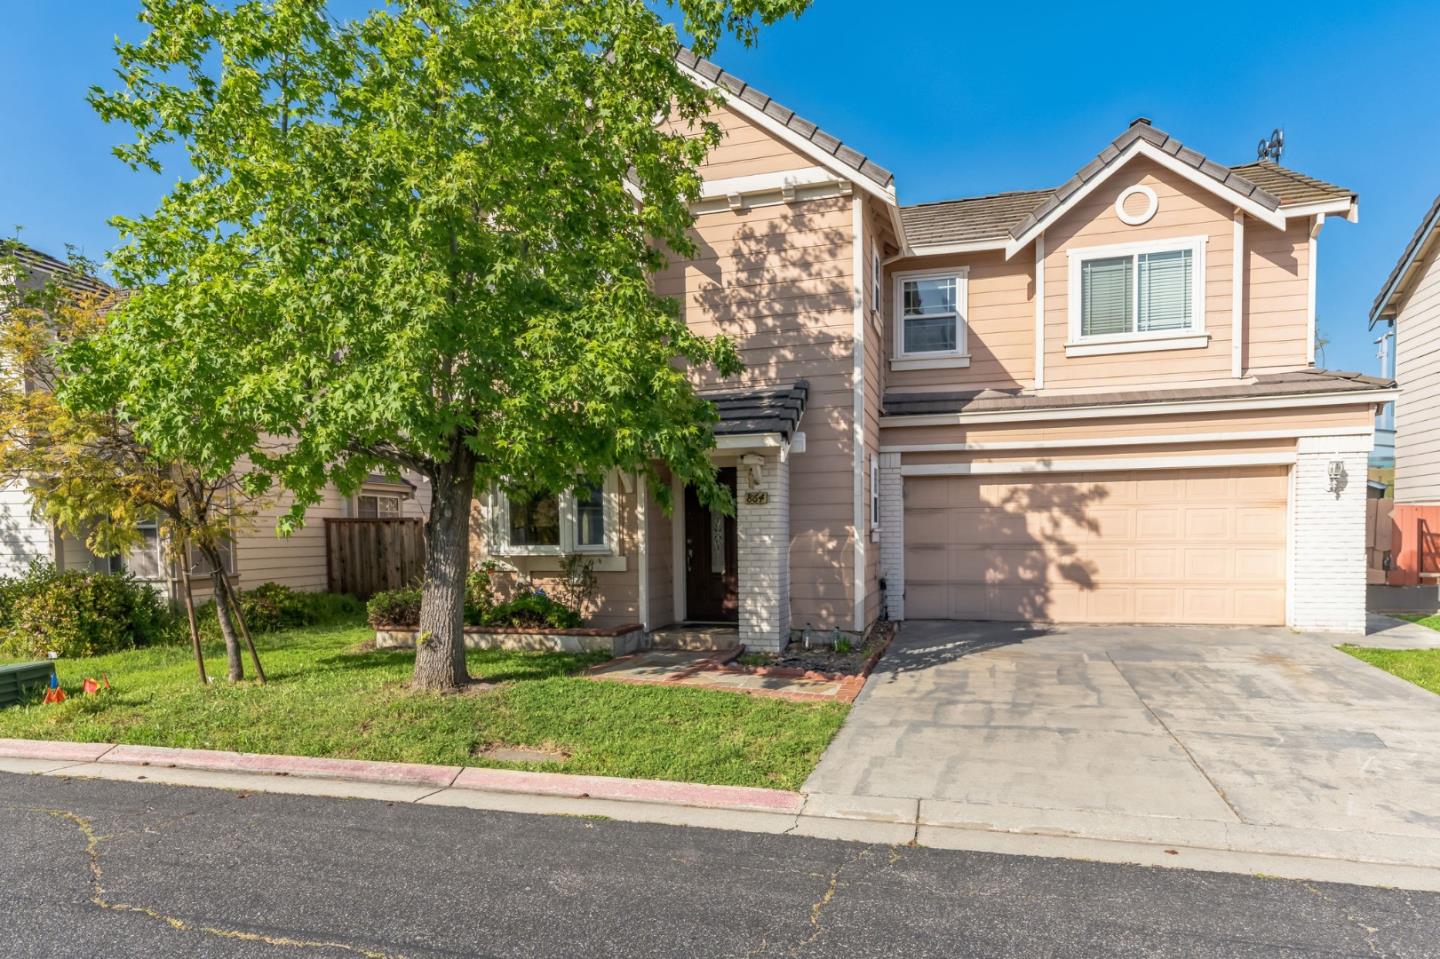 Photo of 864 Coventry Wy in Milpitas, CA